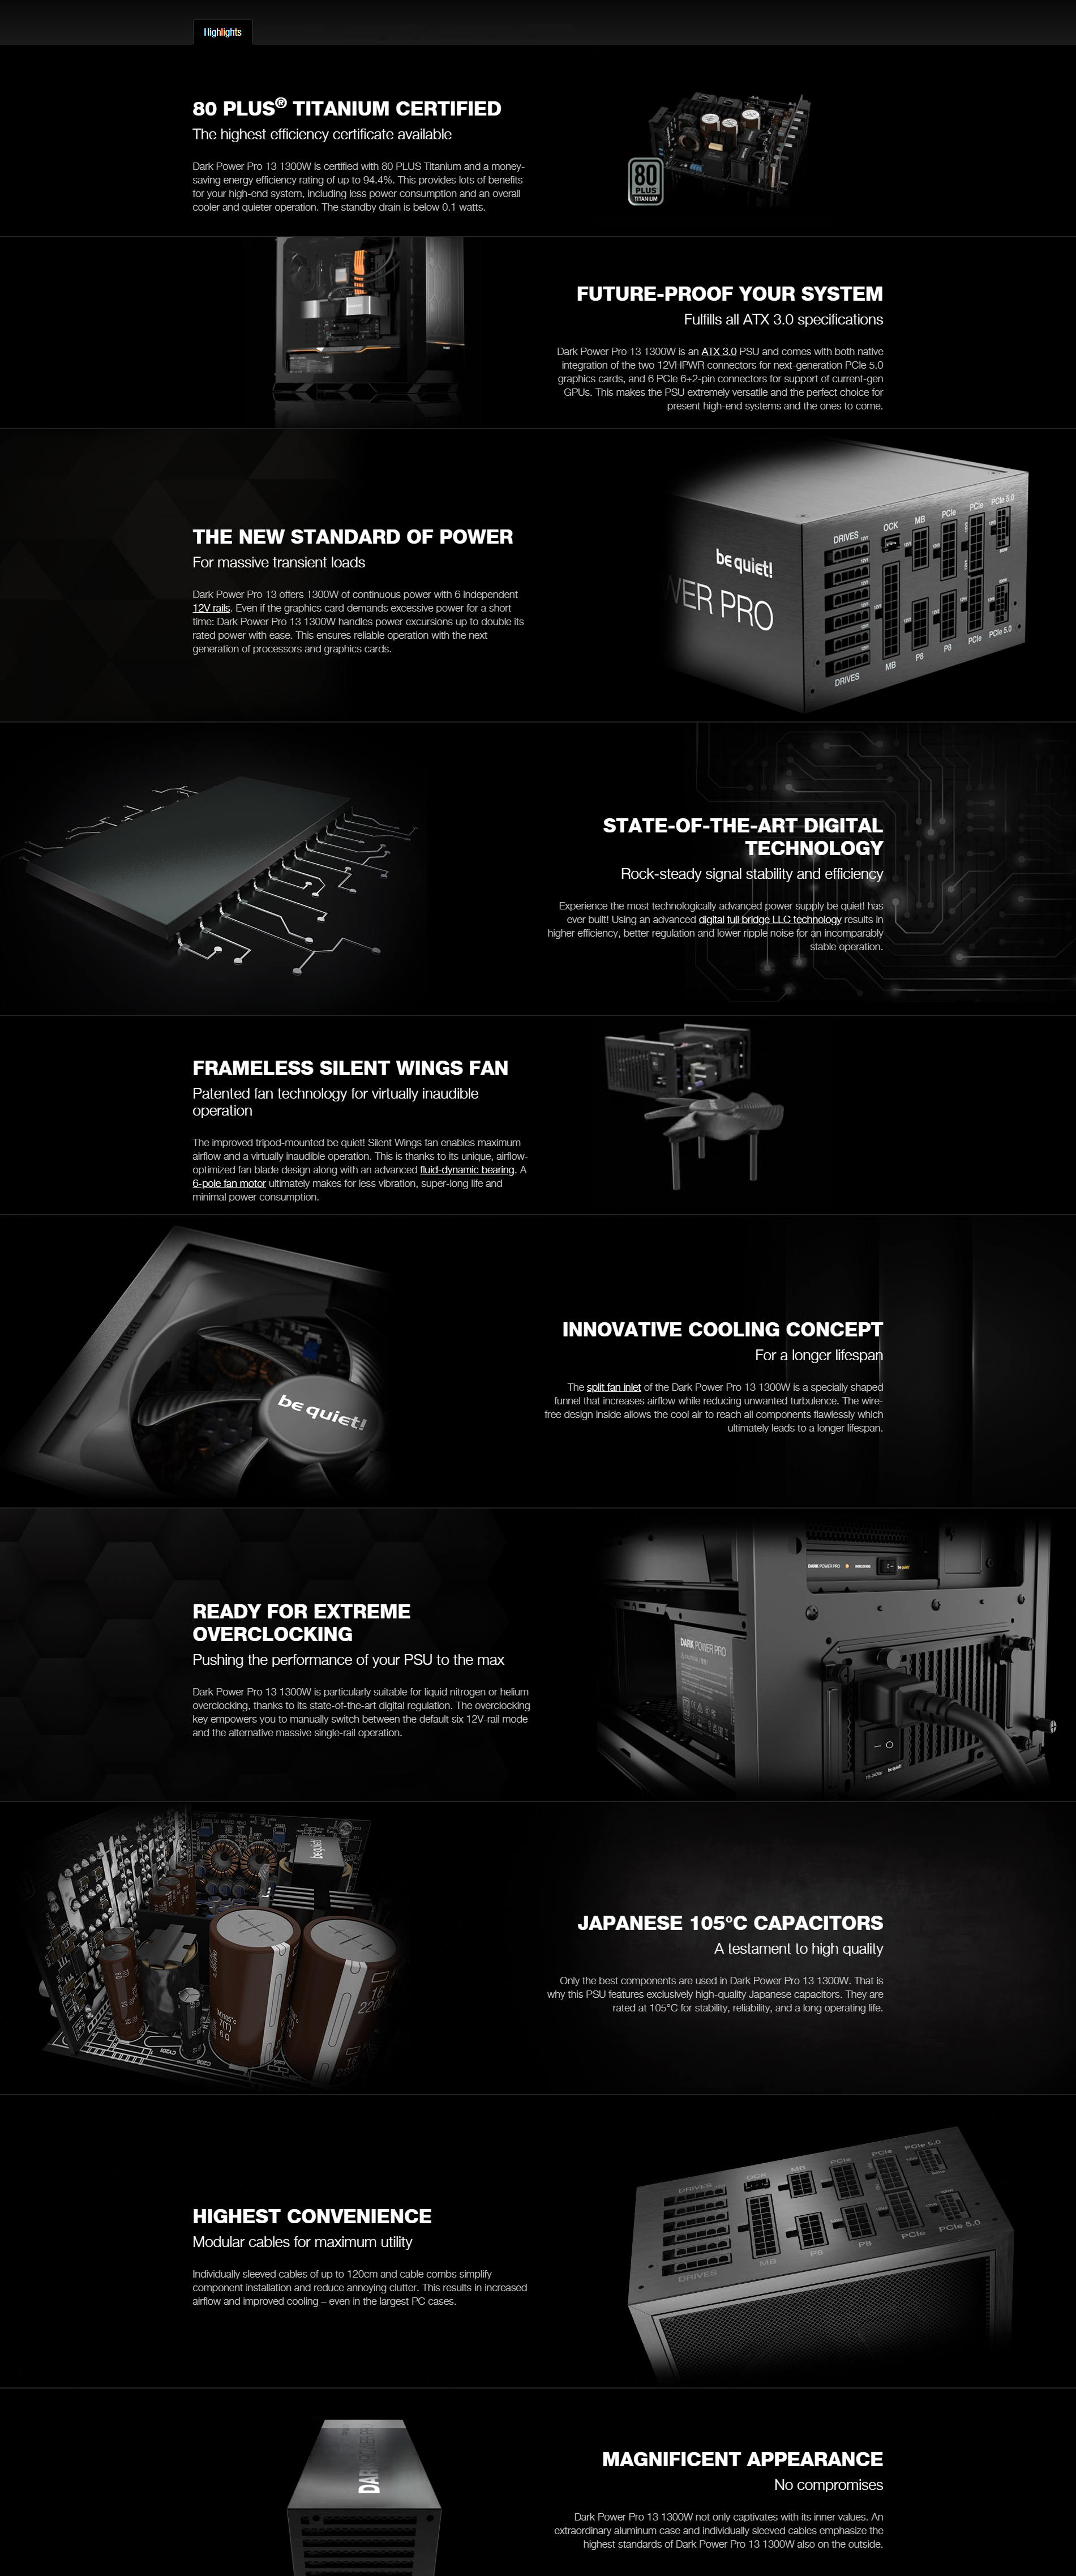 A large marketing image providing additional information about the product be quiet! Dark Power Pro 13 1300W Titanium PCIe 5.0 Modular PSU - Additional alt info not provided